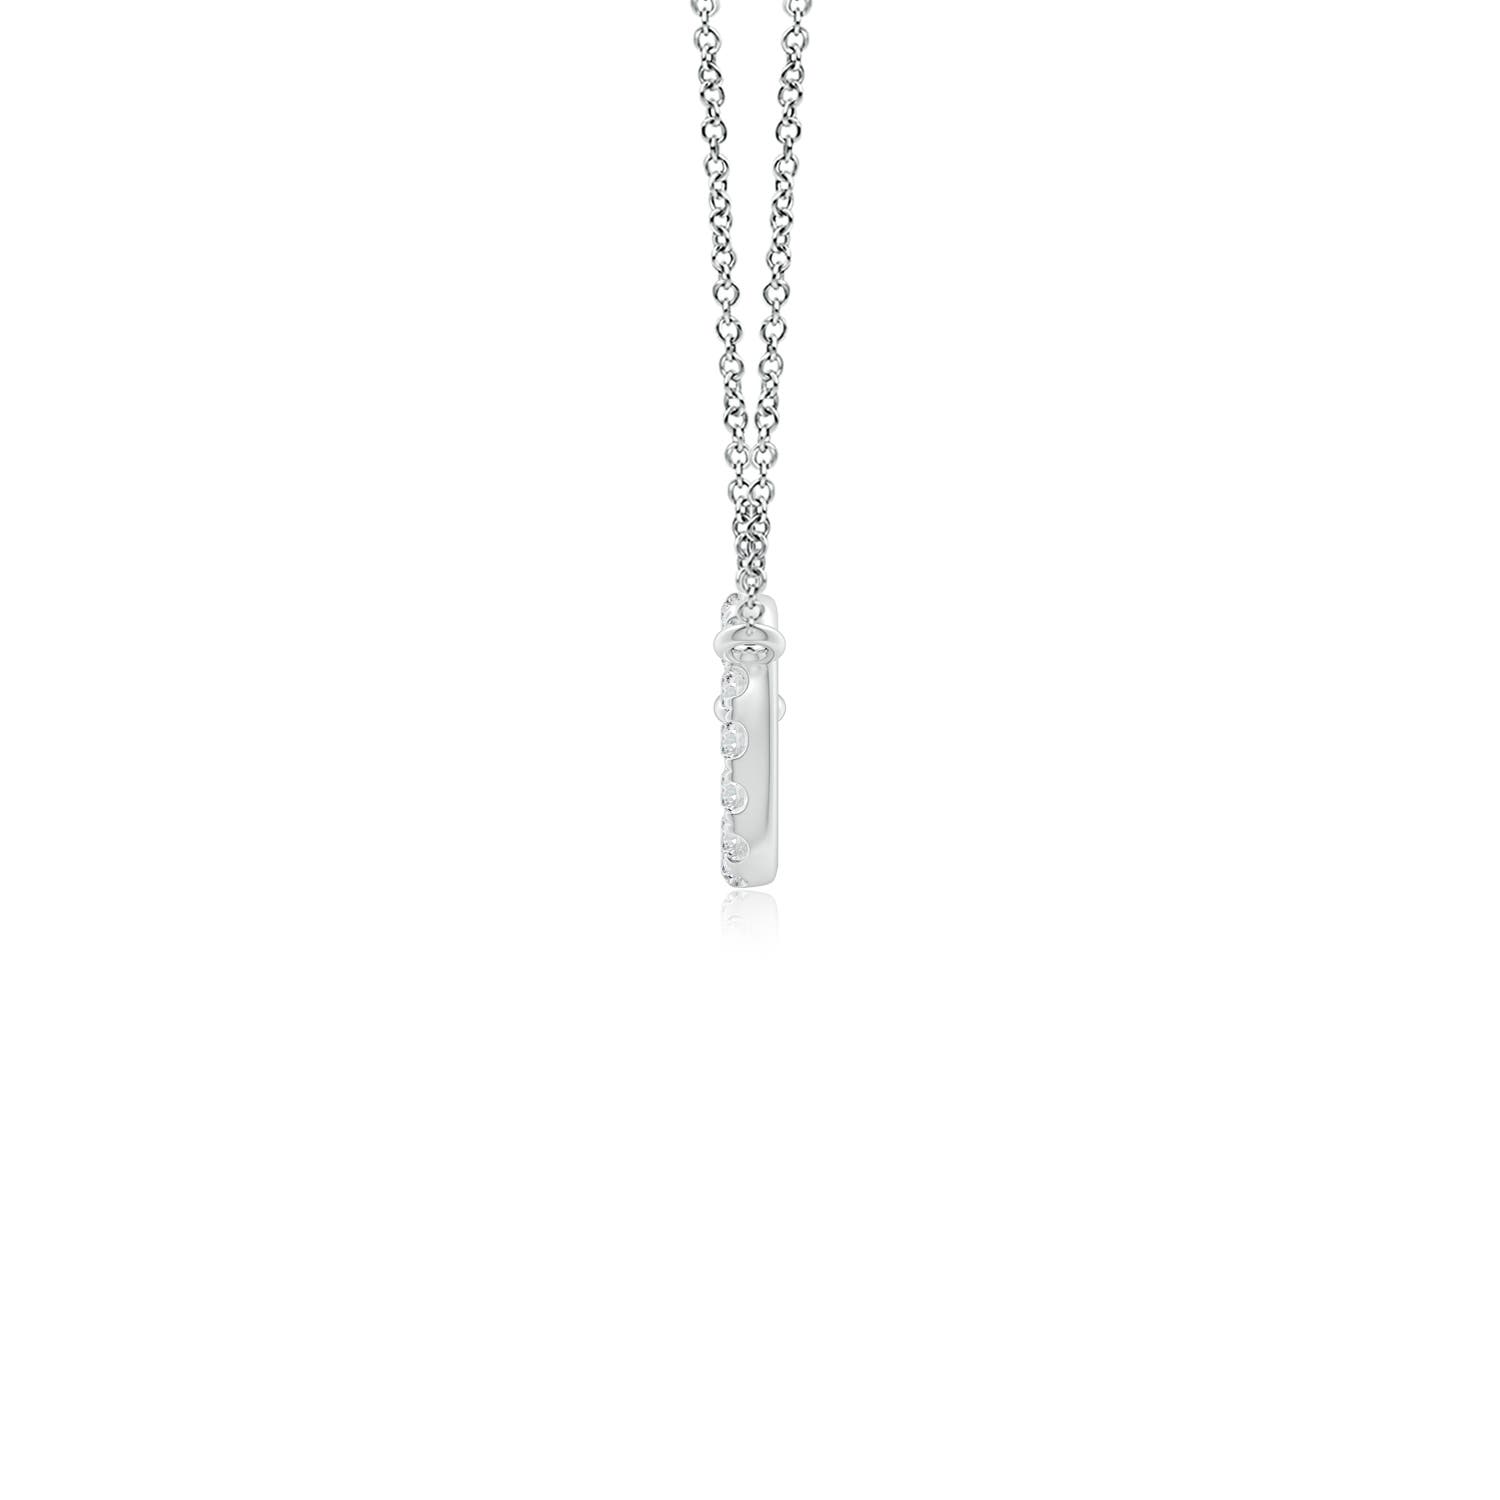 H, SI2 / 0.34 CT / 14 KT White Gold